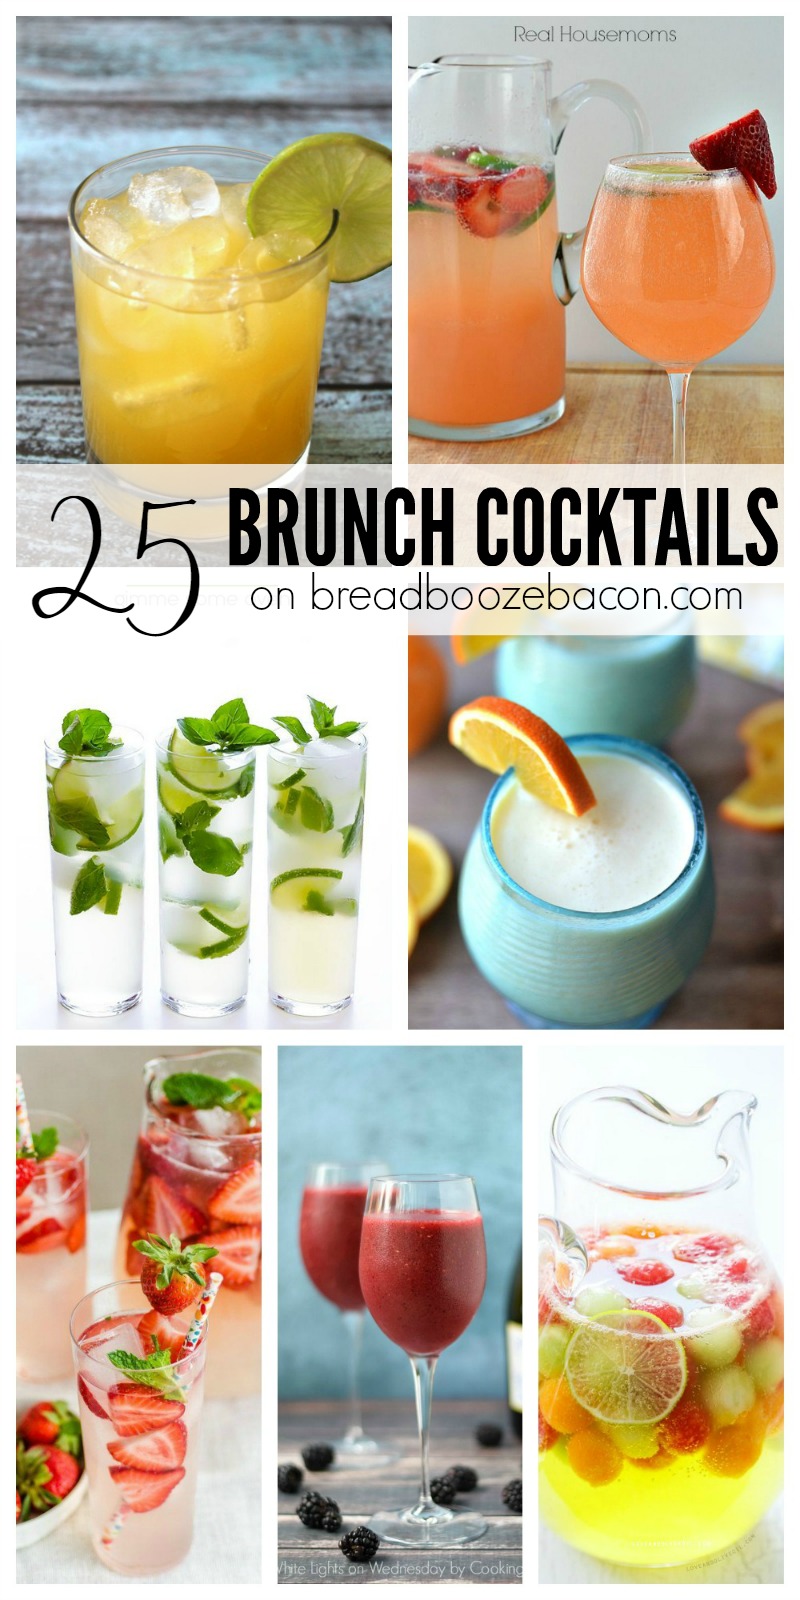 Brunch without booze is a sad, late breakfast. So let's grab a drink from these 25 Brunch Cocktails and day drink!